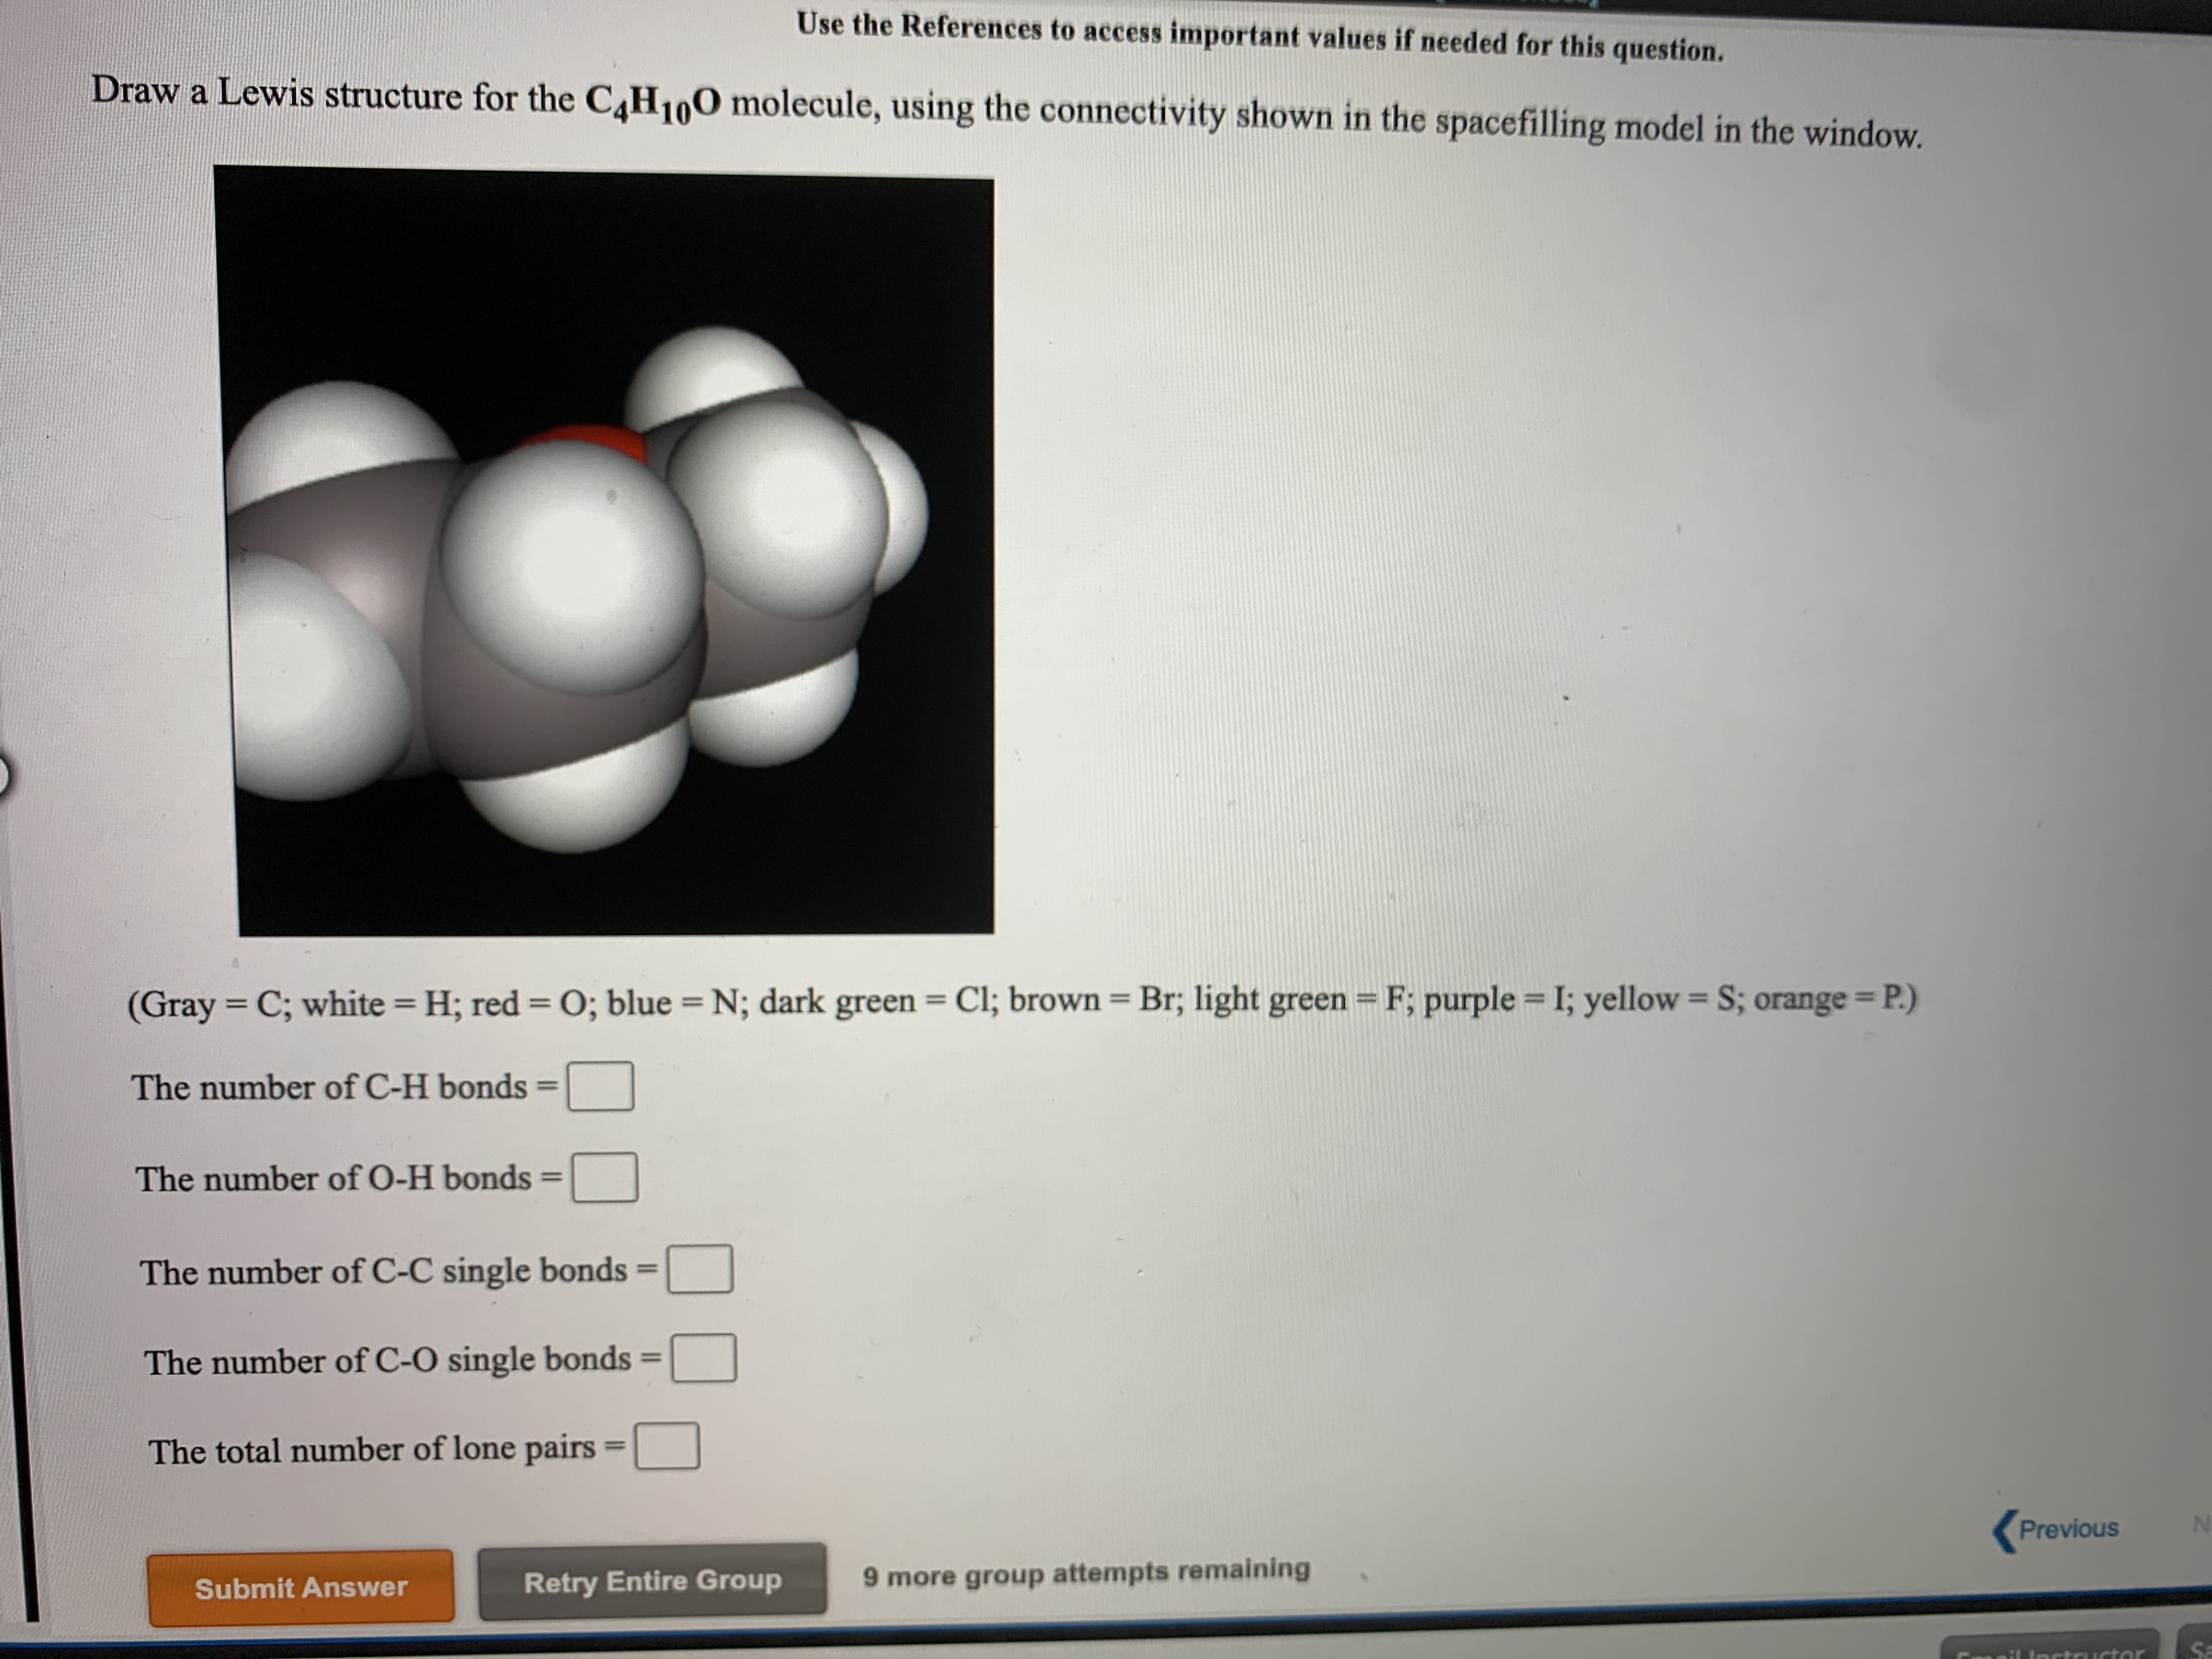 Values if needed for this question.
Draw a Lewis structure for the C,H100 molecule, using the connectivity shown in the spacefilling model in the window.
